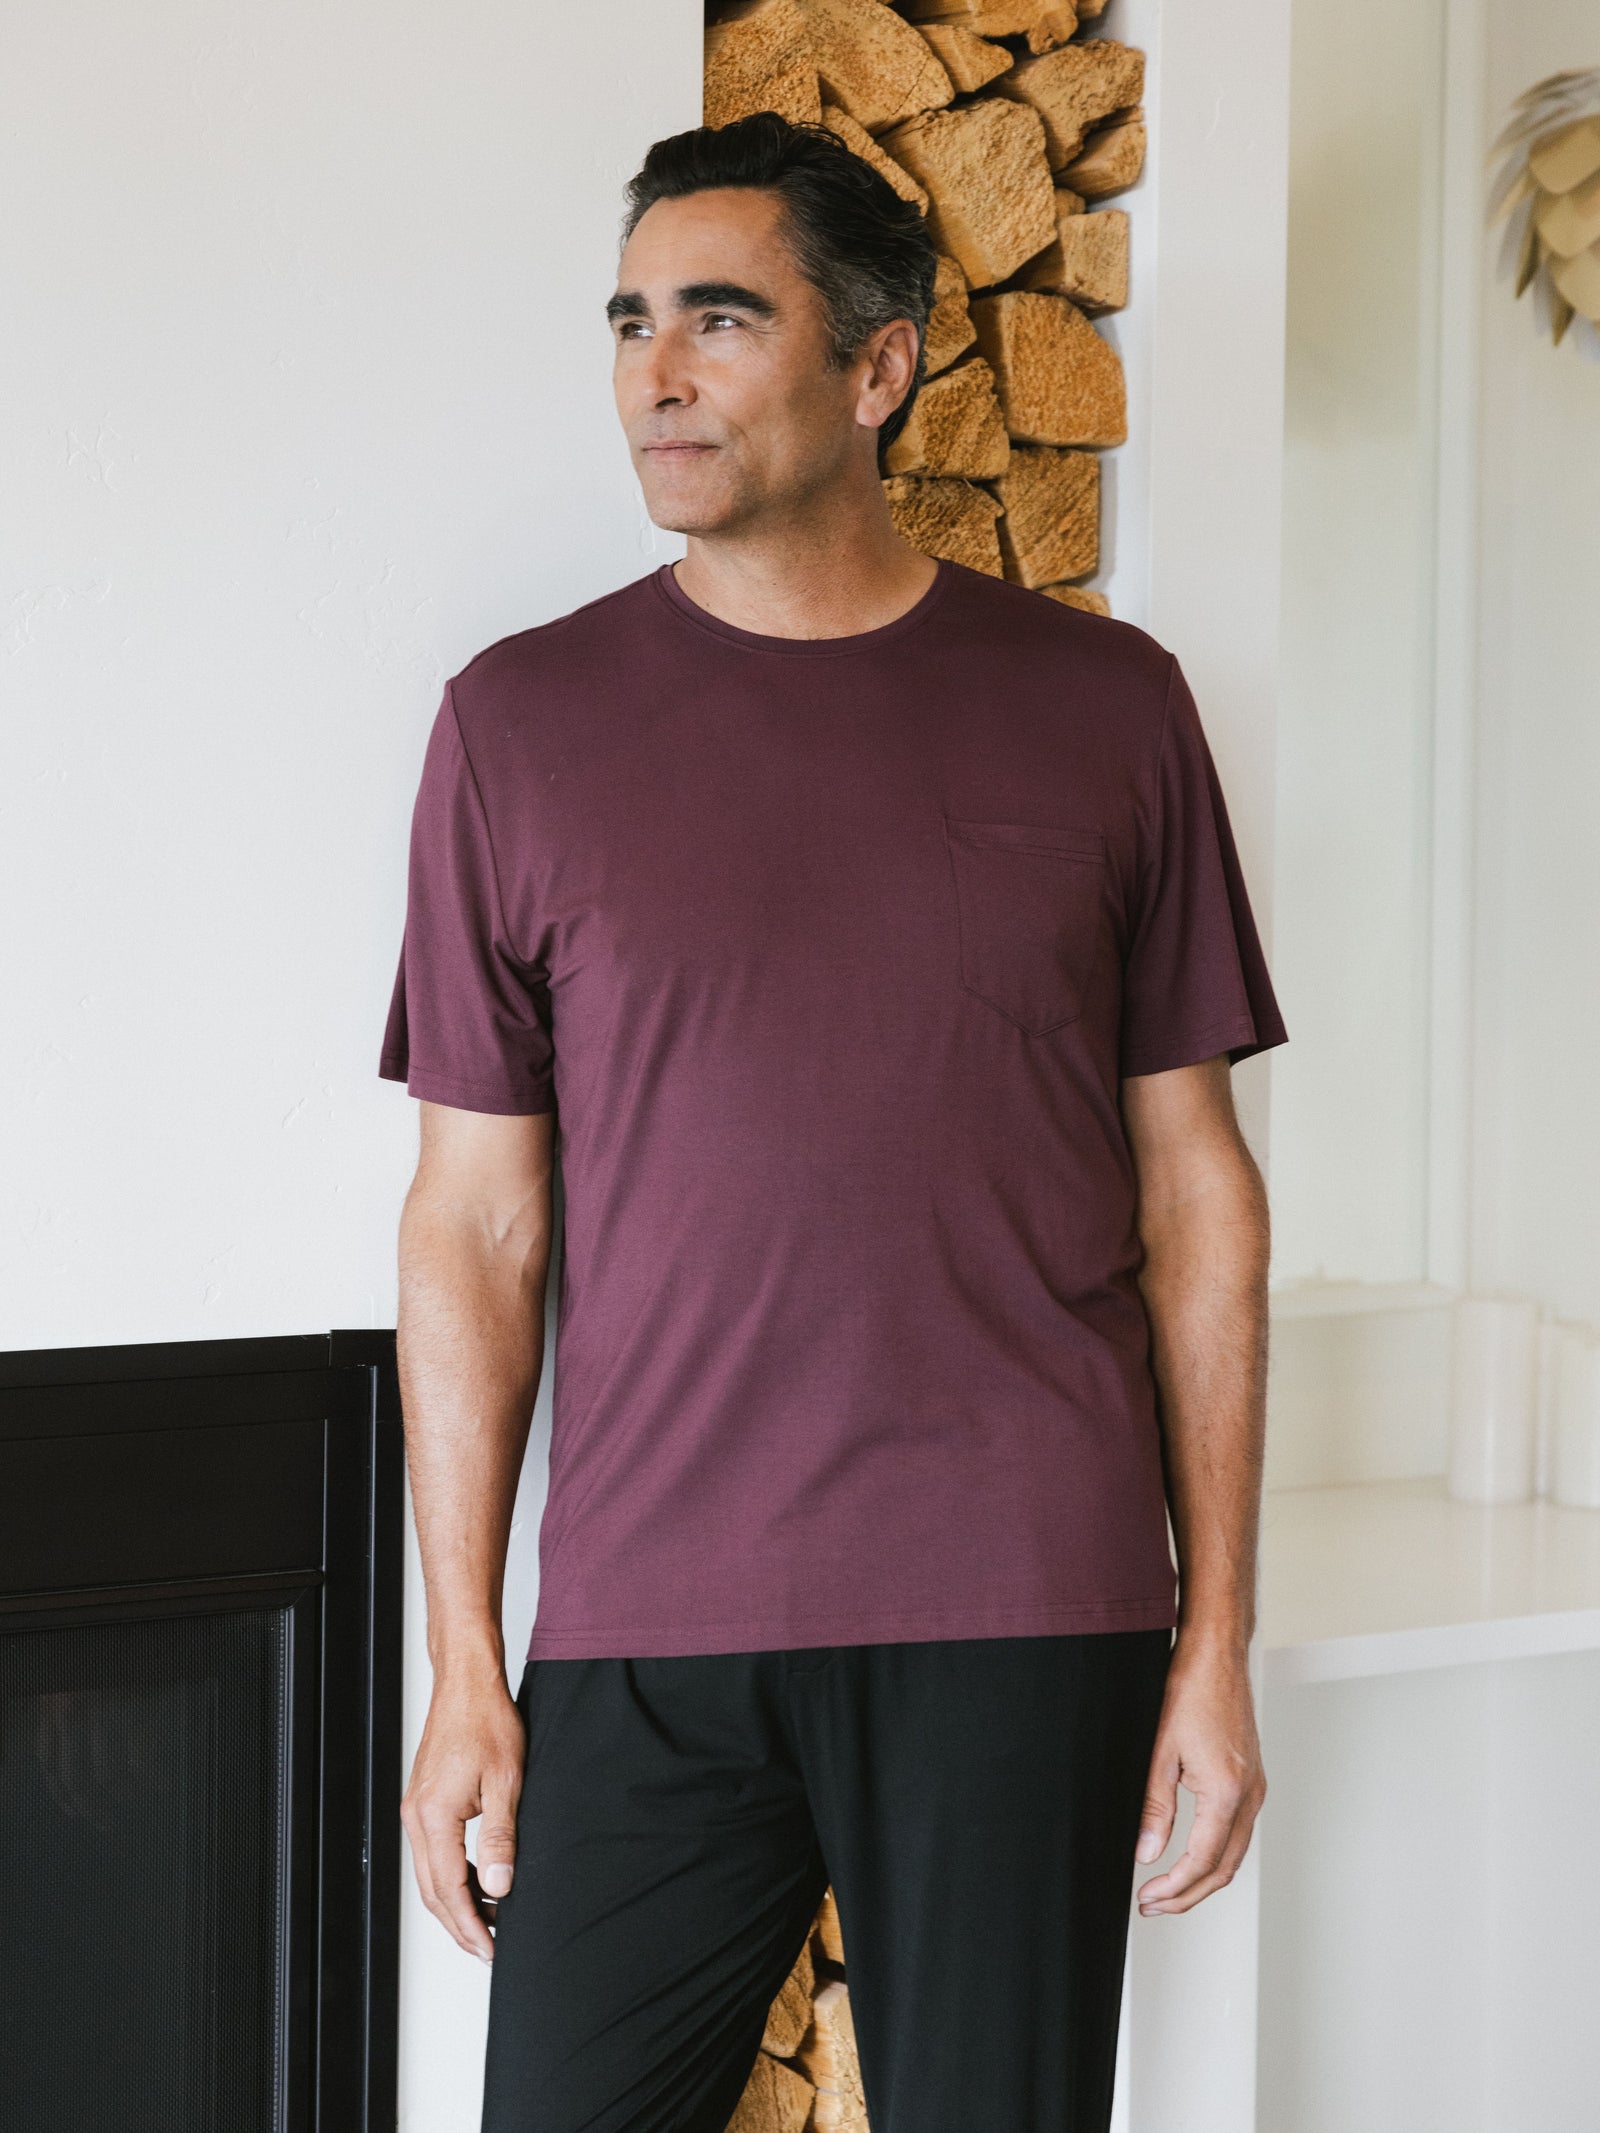 Burgundy Men's Stretch-Knit Bamboo Lounge Tee. A man is wearing the lounge tee in a well lit home.